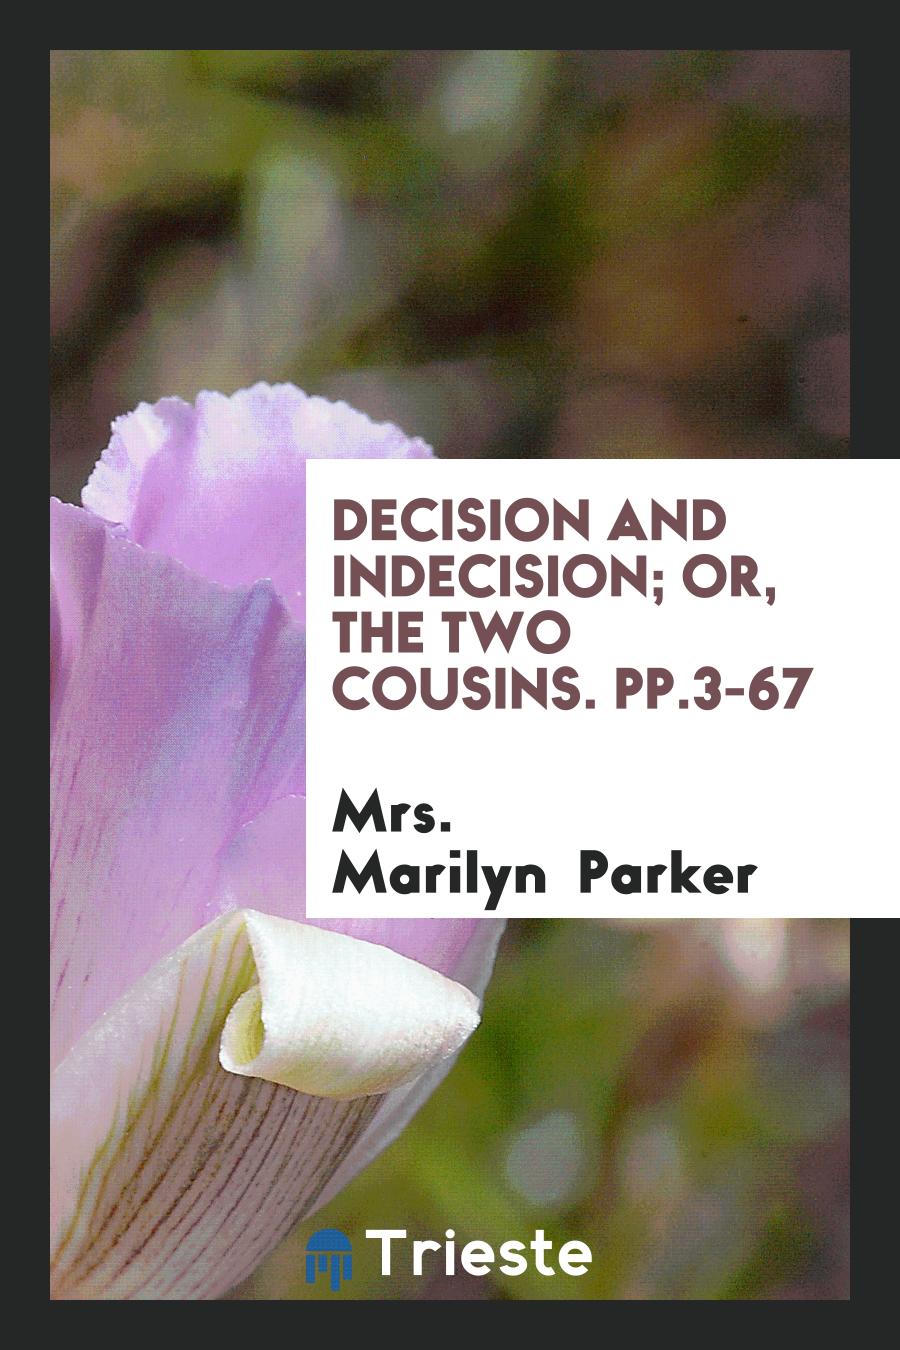 Decision and indecision; or, The two cousins. pp.3-67